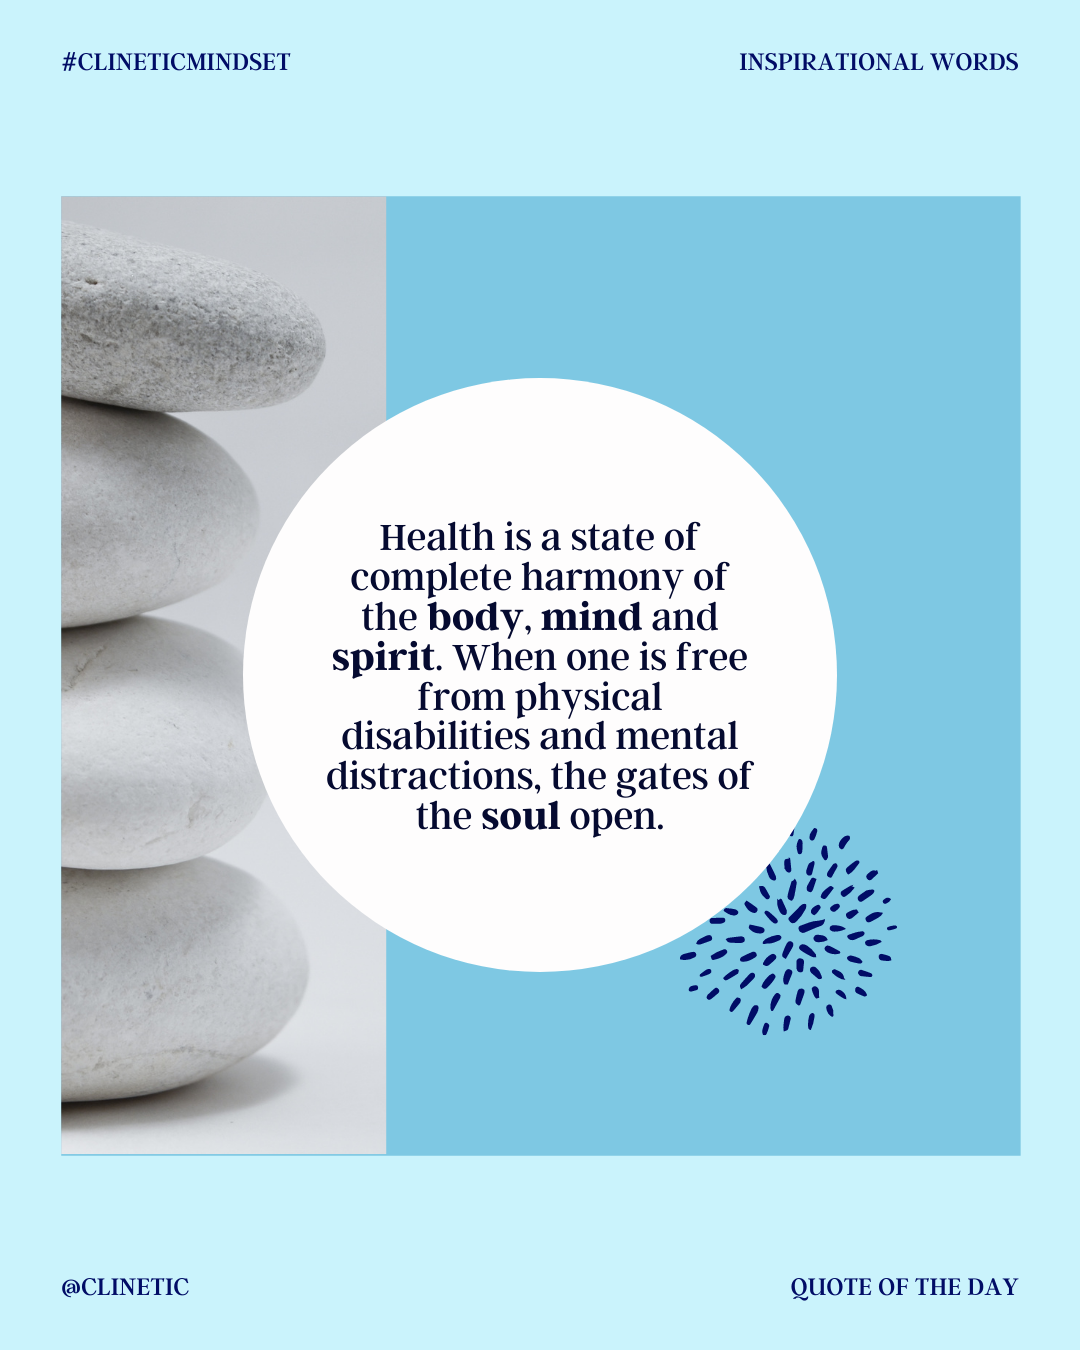 Health is a state of complete harmony of the body, mind and spirit.